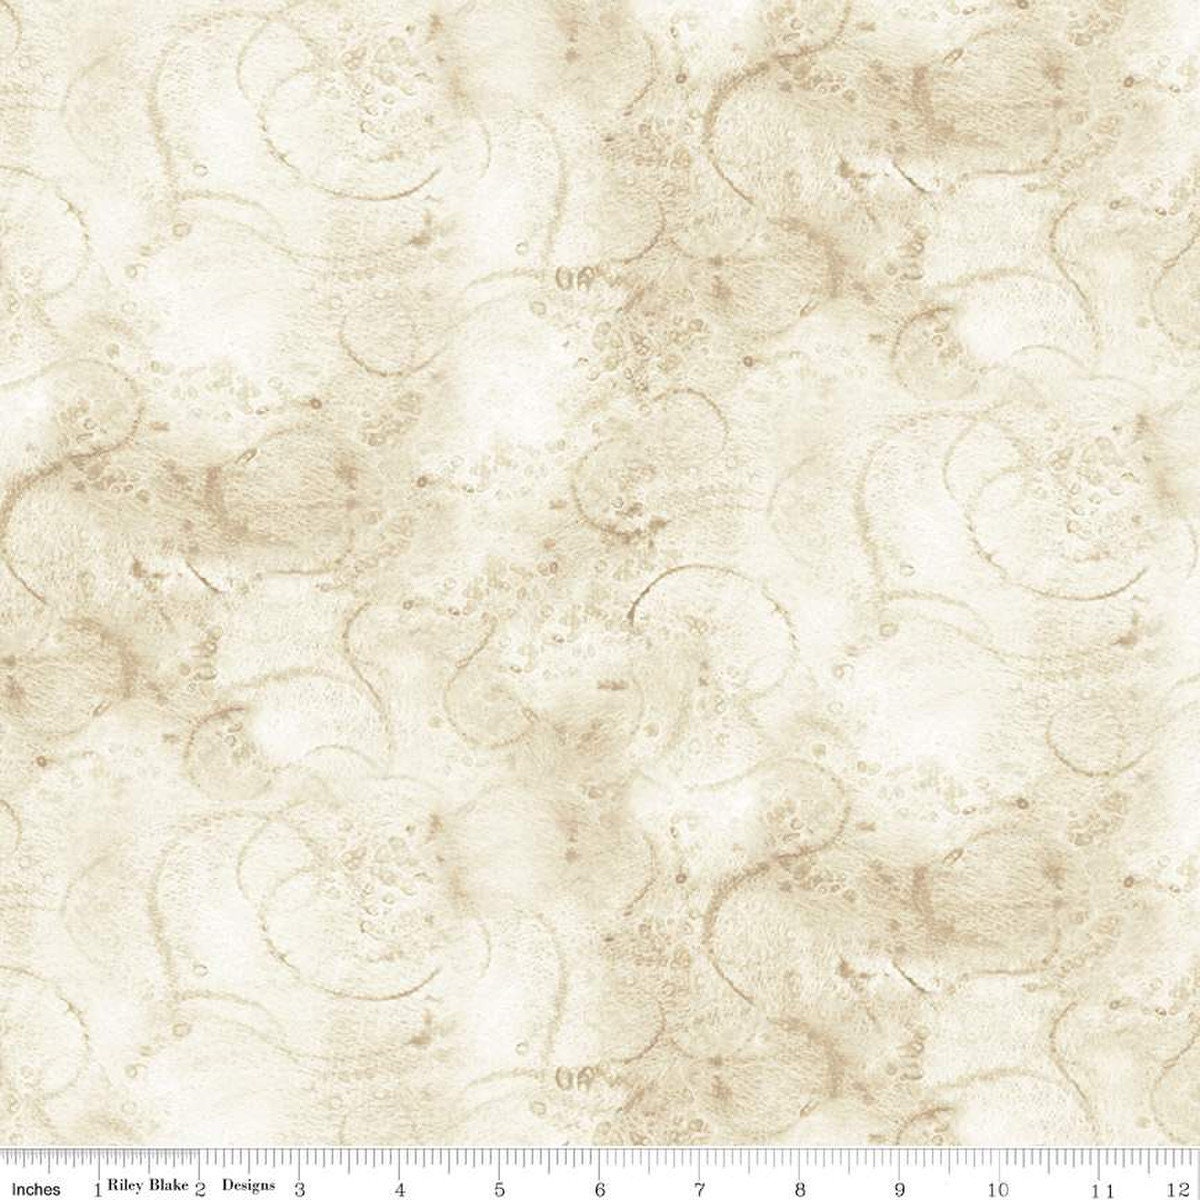 Painter's Watercolor Swirl Parchment Fabric - Riley Blake Designs C680PARCHMENT, Cream Vintage Look Fabric, Cream Blender Fabric by the Yard